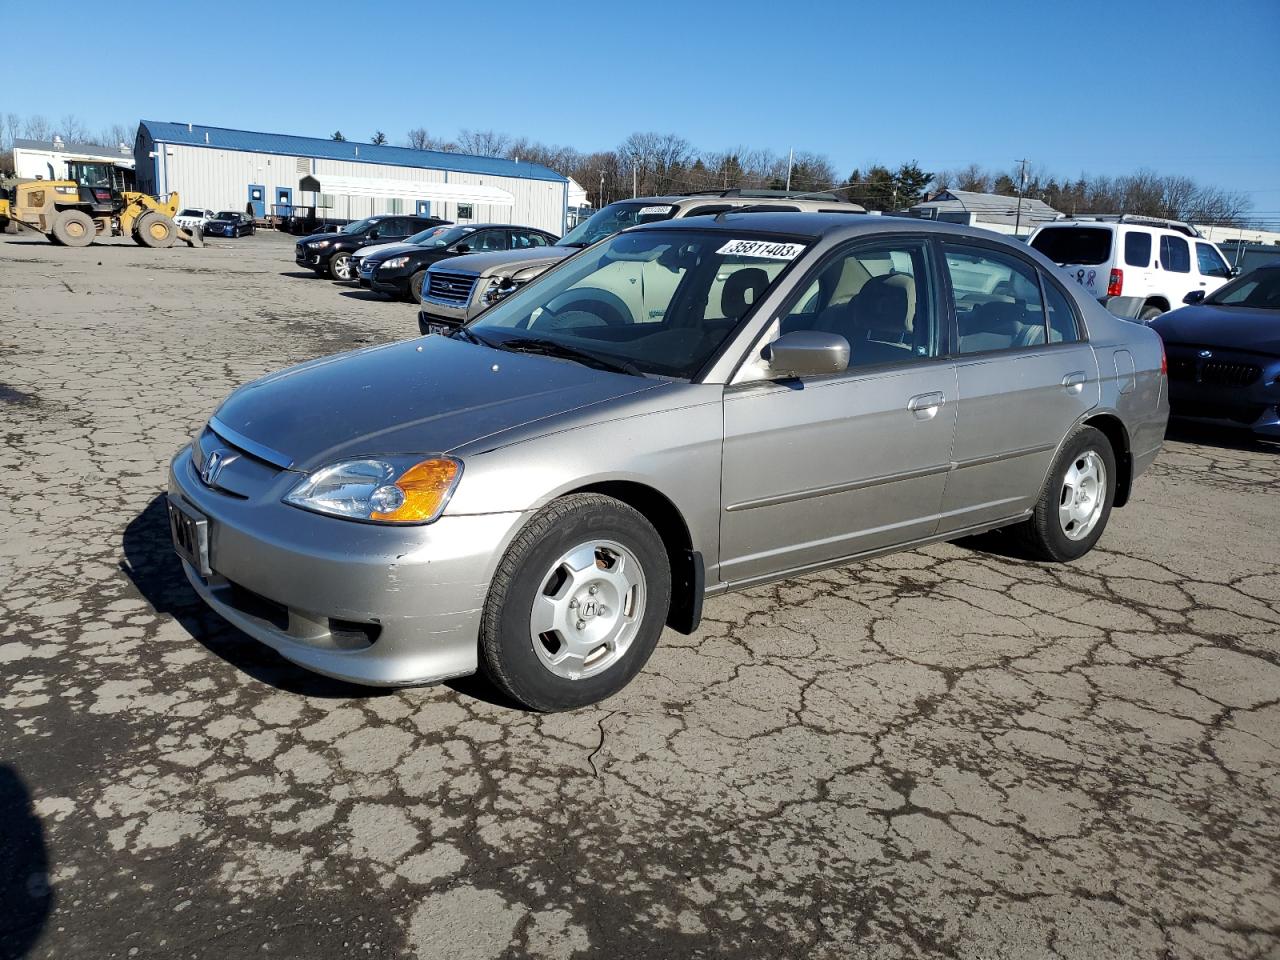 2003 Honda Civic Hybrid for sale at Copart Pennsburg, PA Lot #35811*** |  SalvageReseller.com